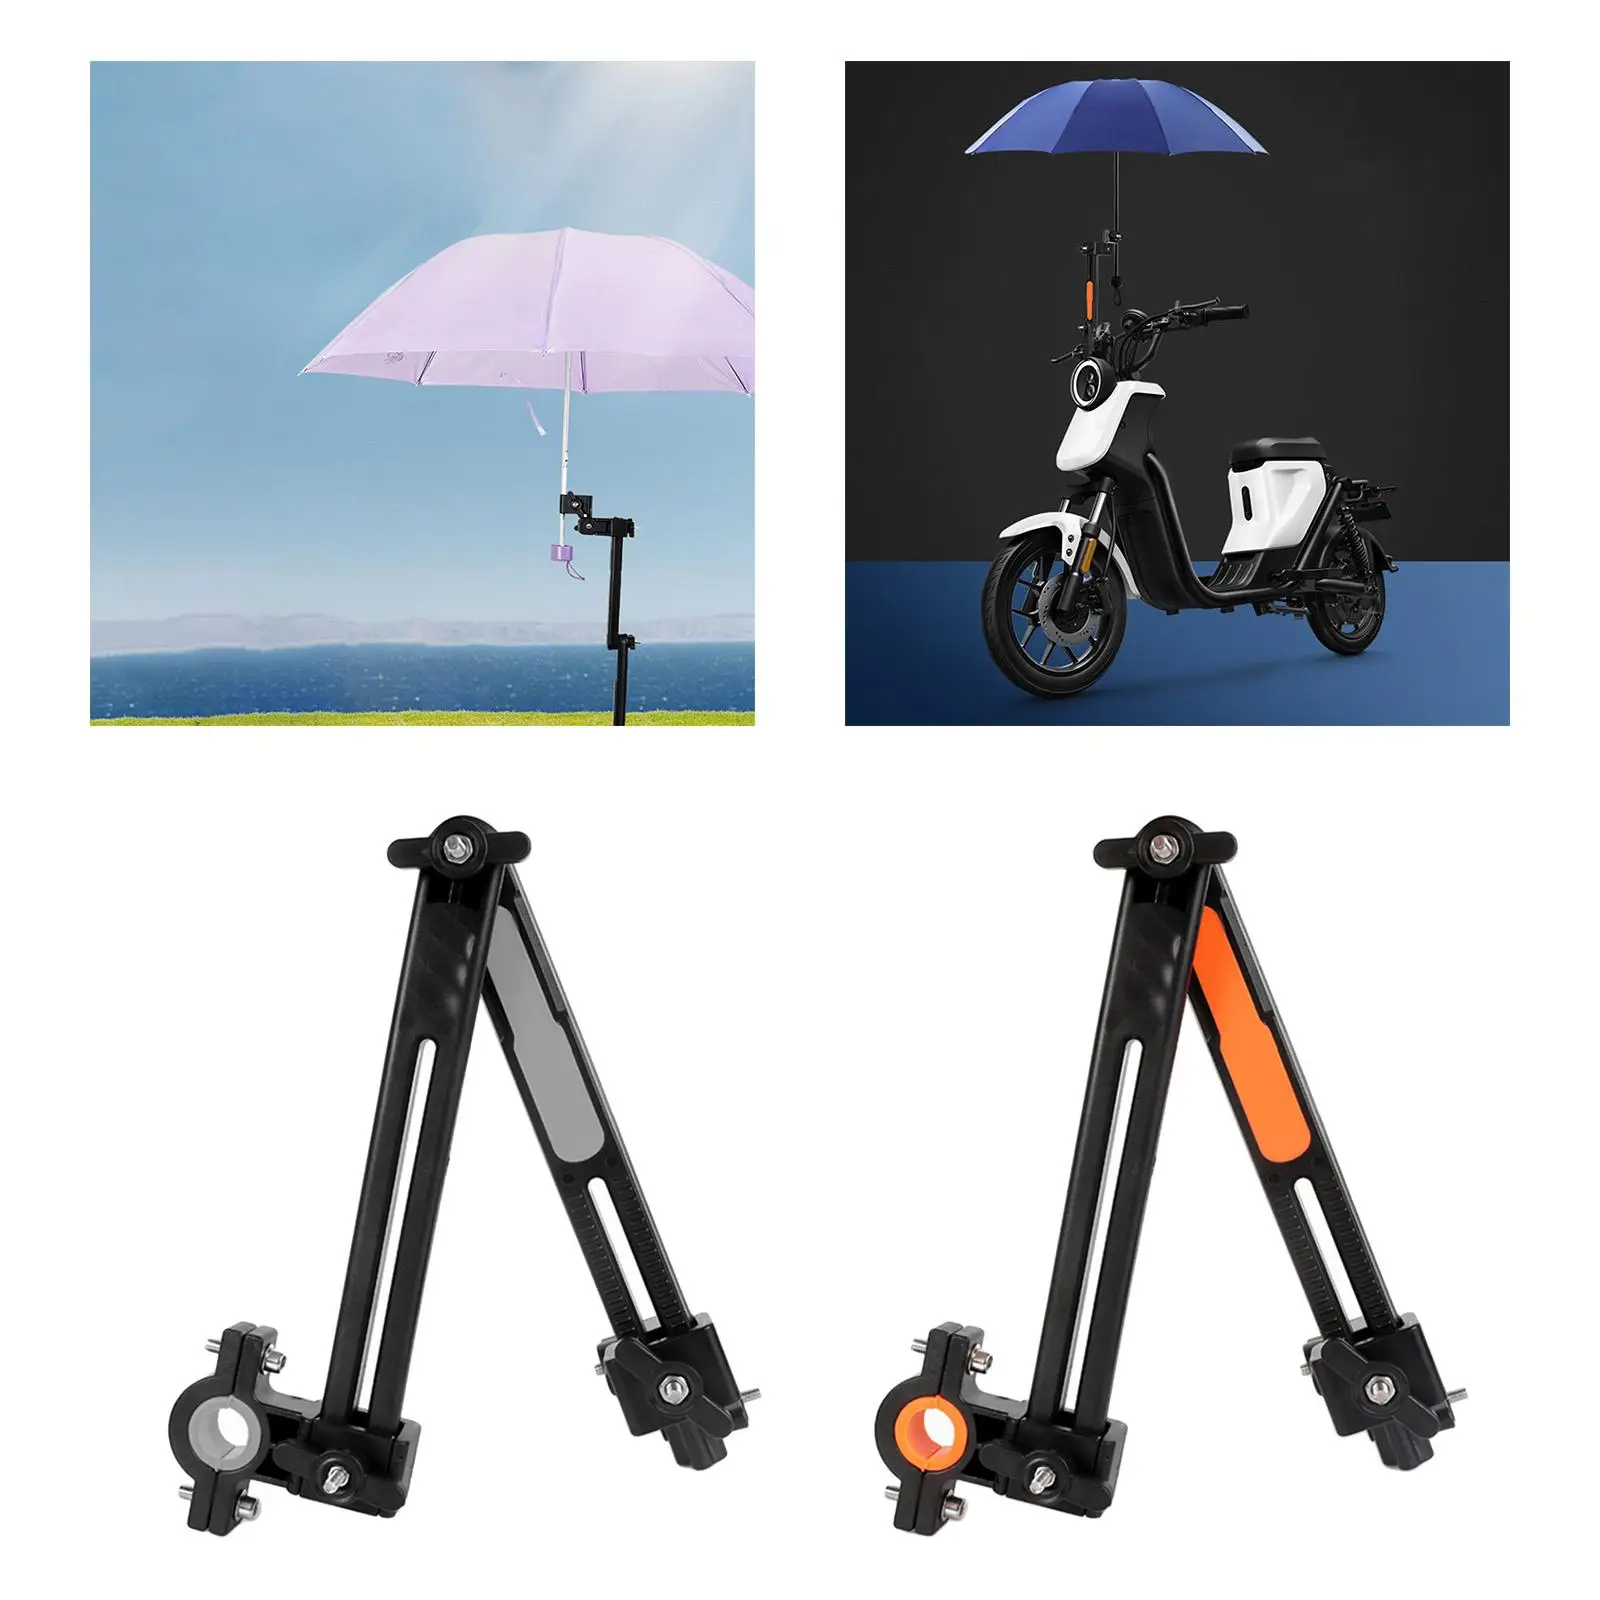 Universal Bicycle Umbrella Stand Foldable Mount Stand Umbrella Holder for Golf Chair